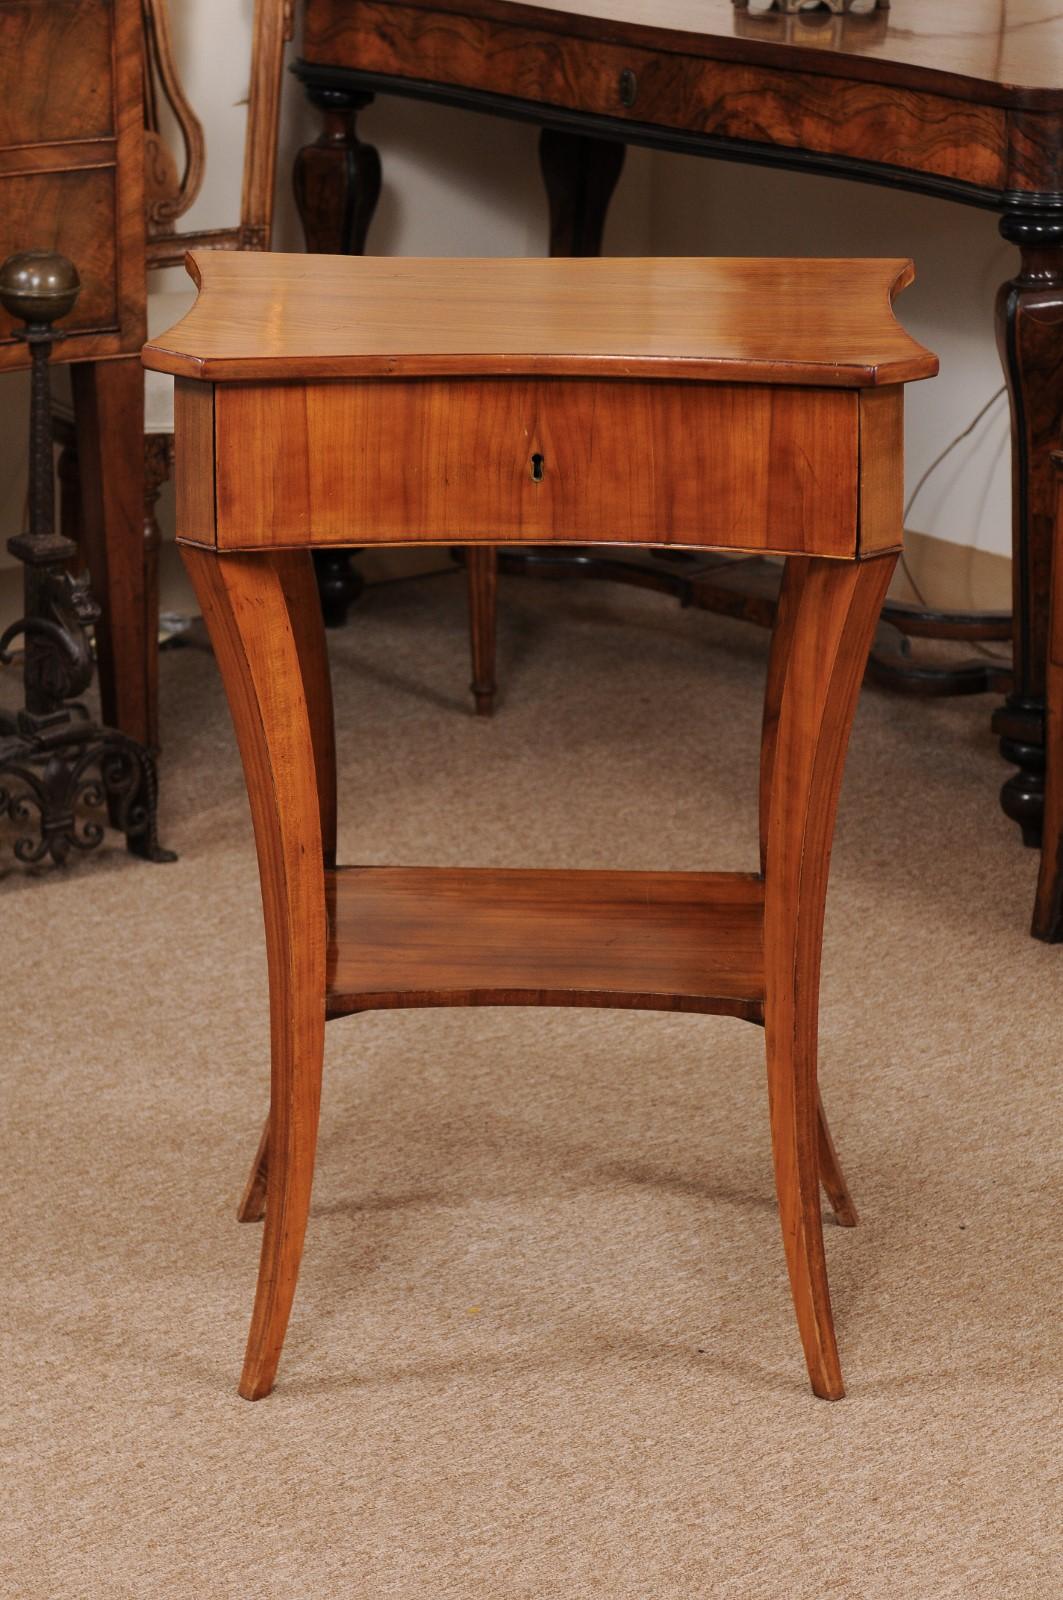 A Biedermeier early 19th century side table in ash and fruitwood with concave formed top, drawer in frieze and lower shelf joined by tapered splayed legs.